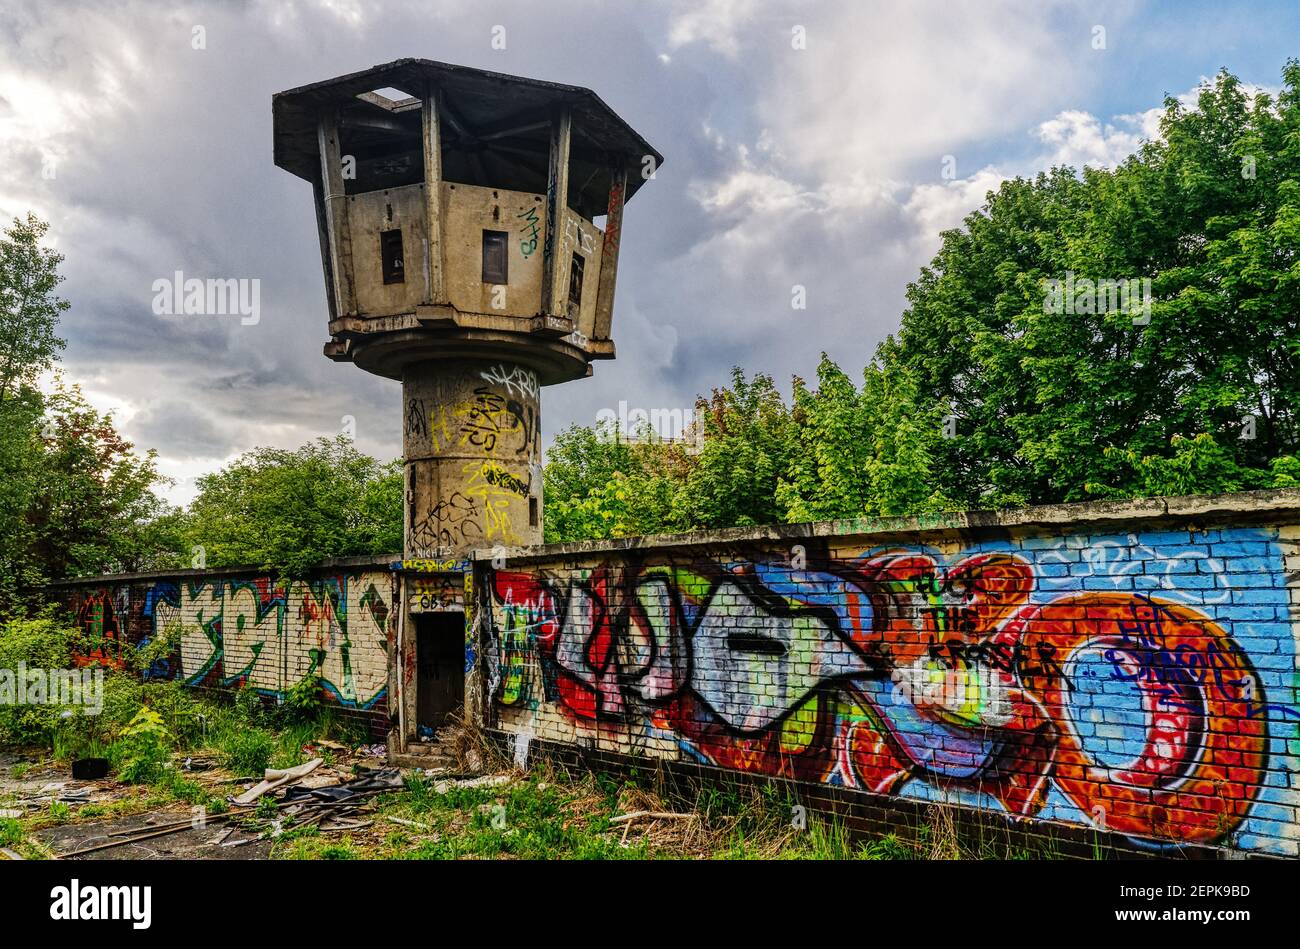 An abandoned and graffiti covered guard's watchtower in Berlin, Germany Stock Photo